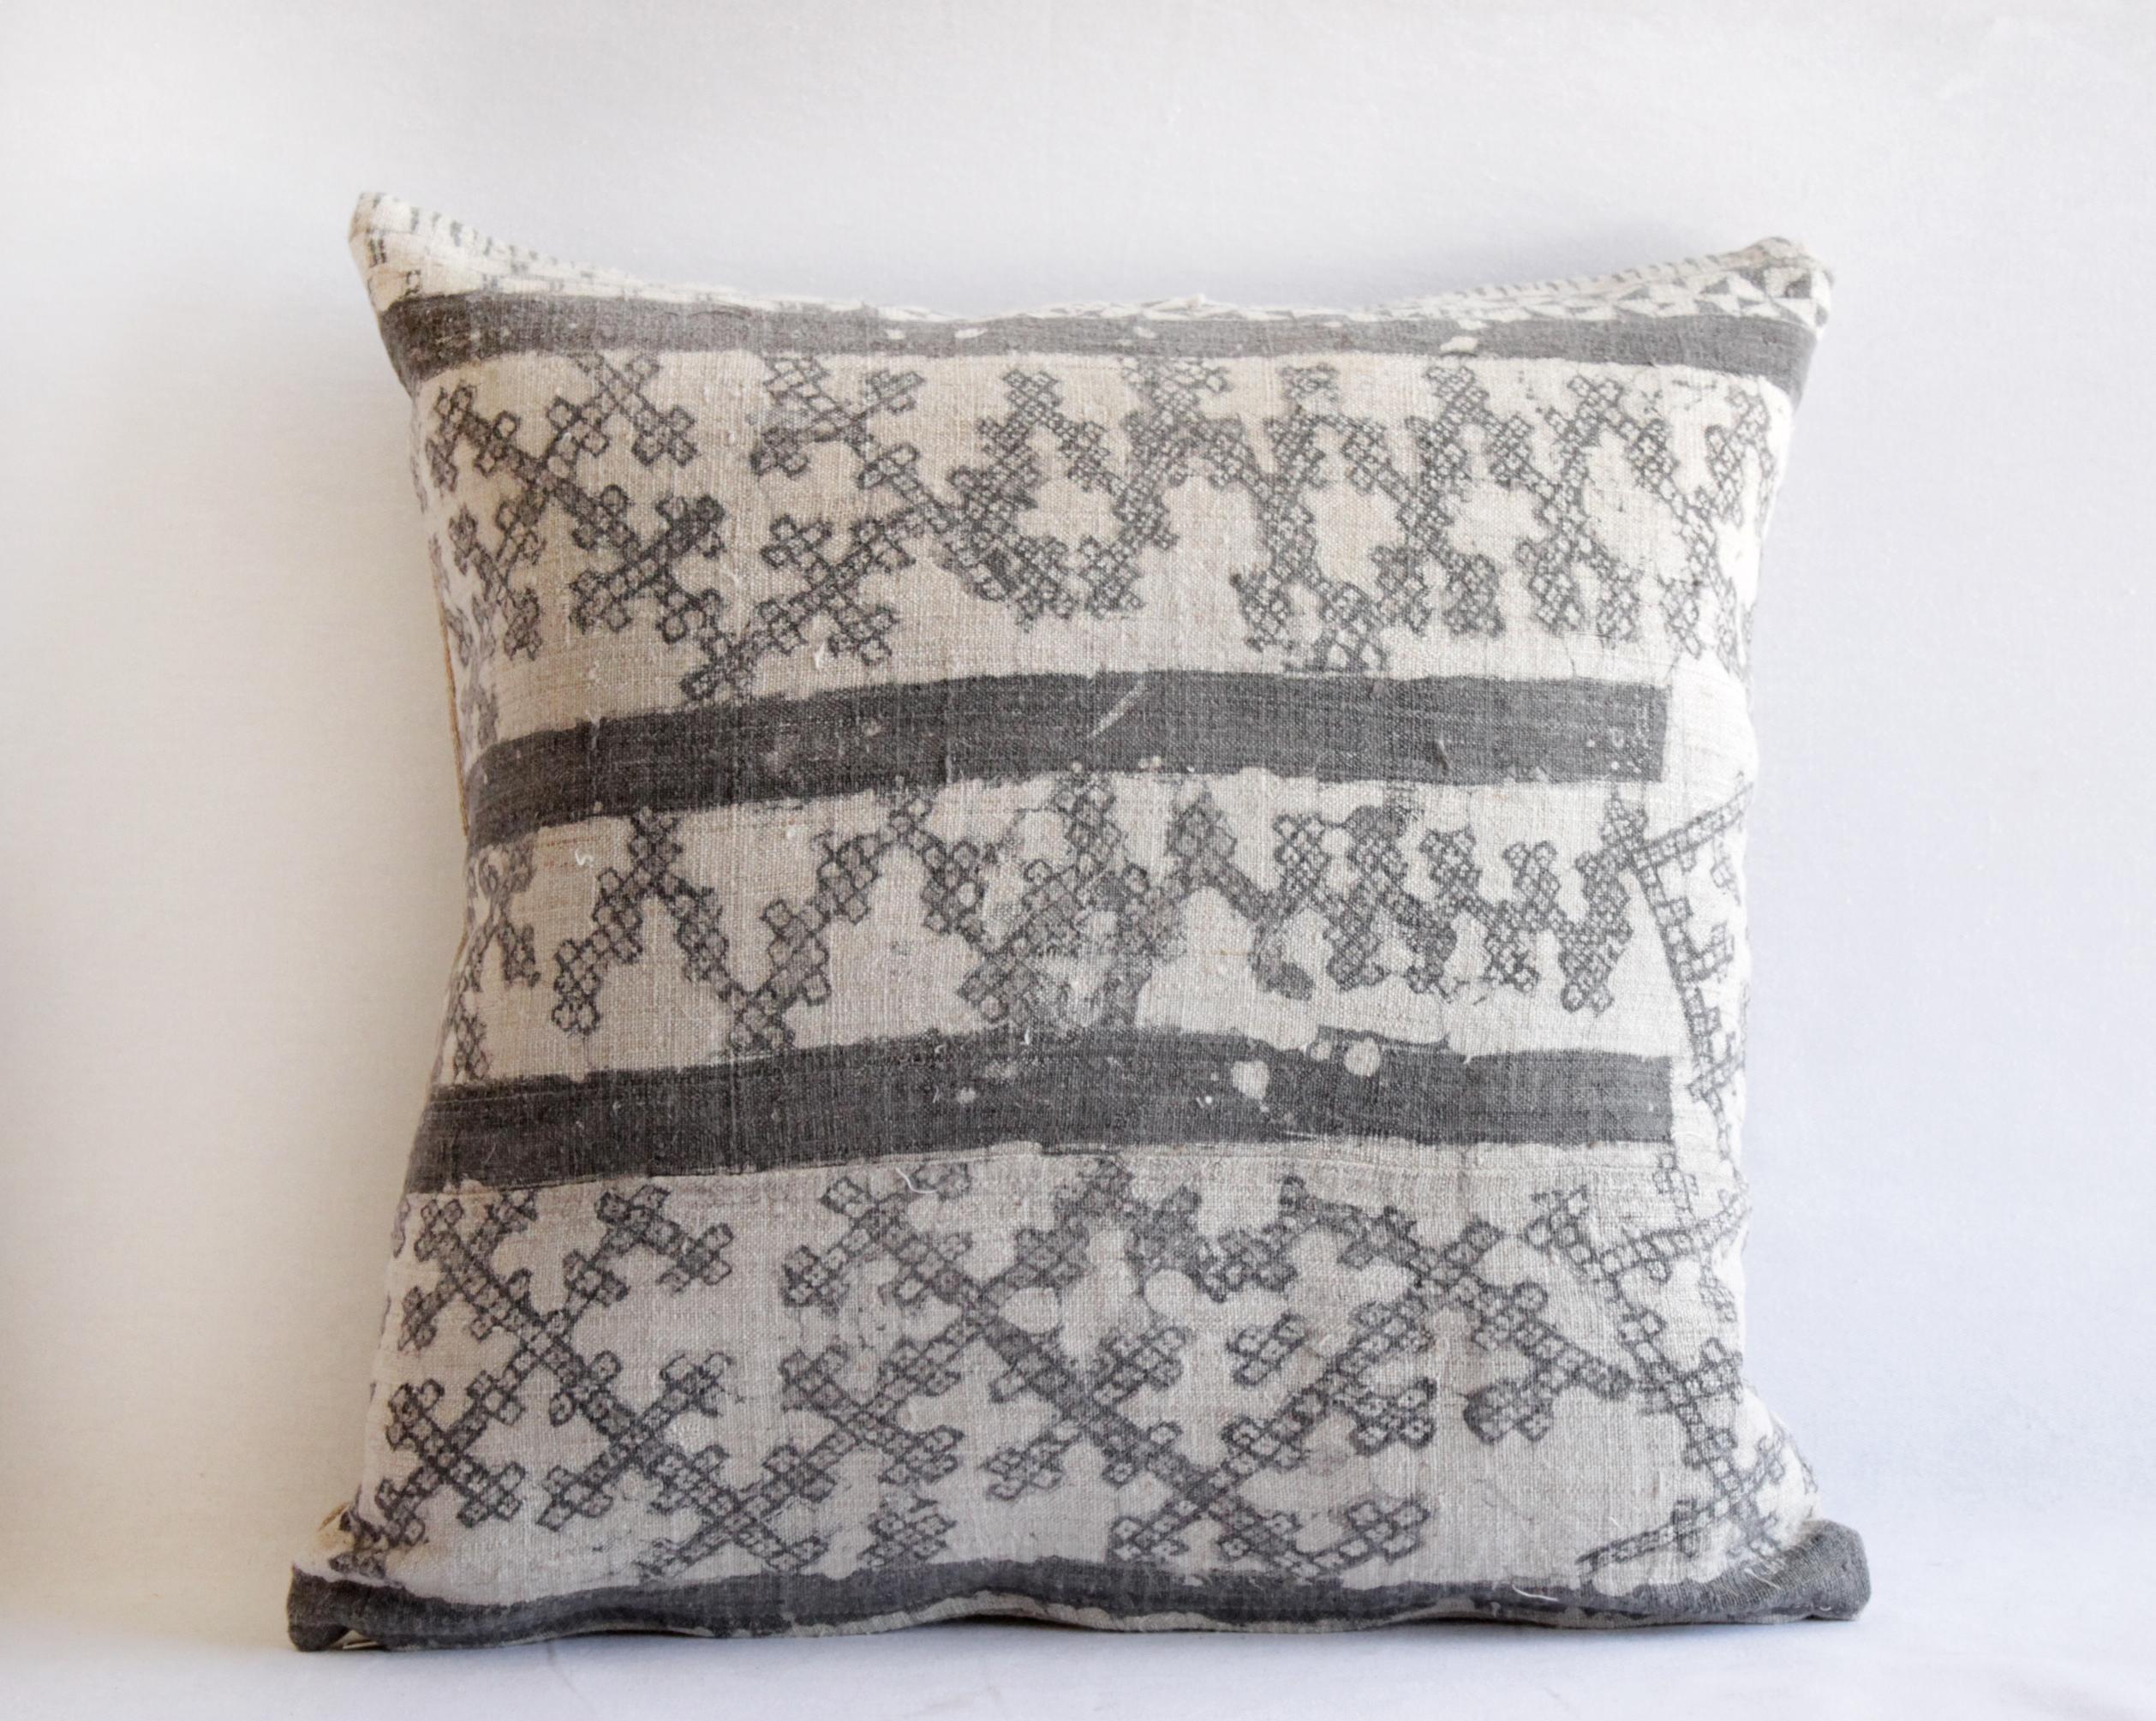 Vintage Batik accent pillow charcoal and natural linen
This is a beautiful vintage textile piece we have created into a pillow. The front side is a linen weave, light natural color background with a darker charcoal grey (faded black) batik pattern.